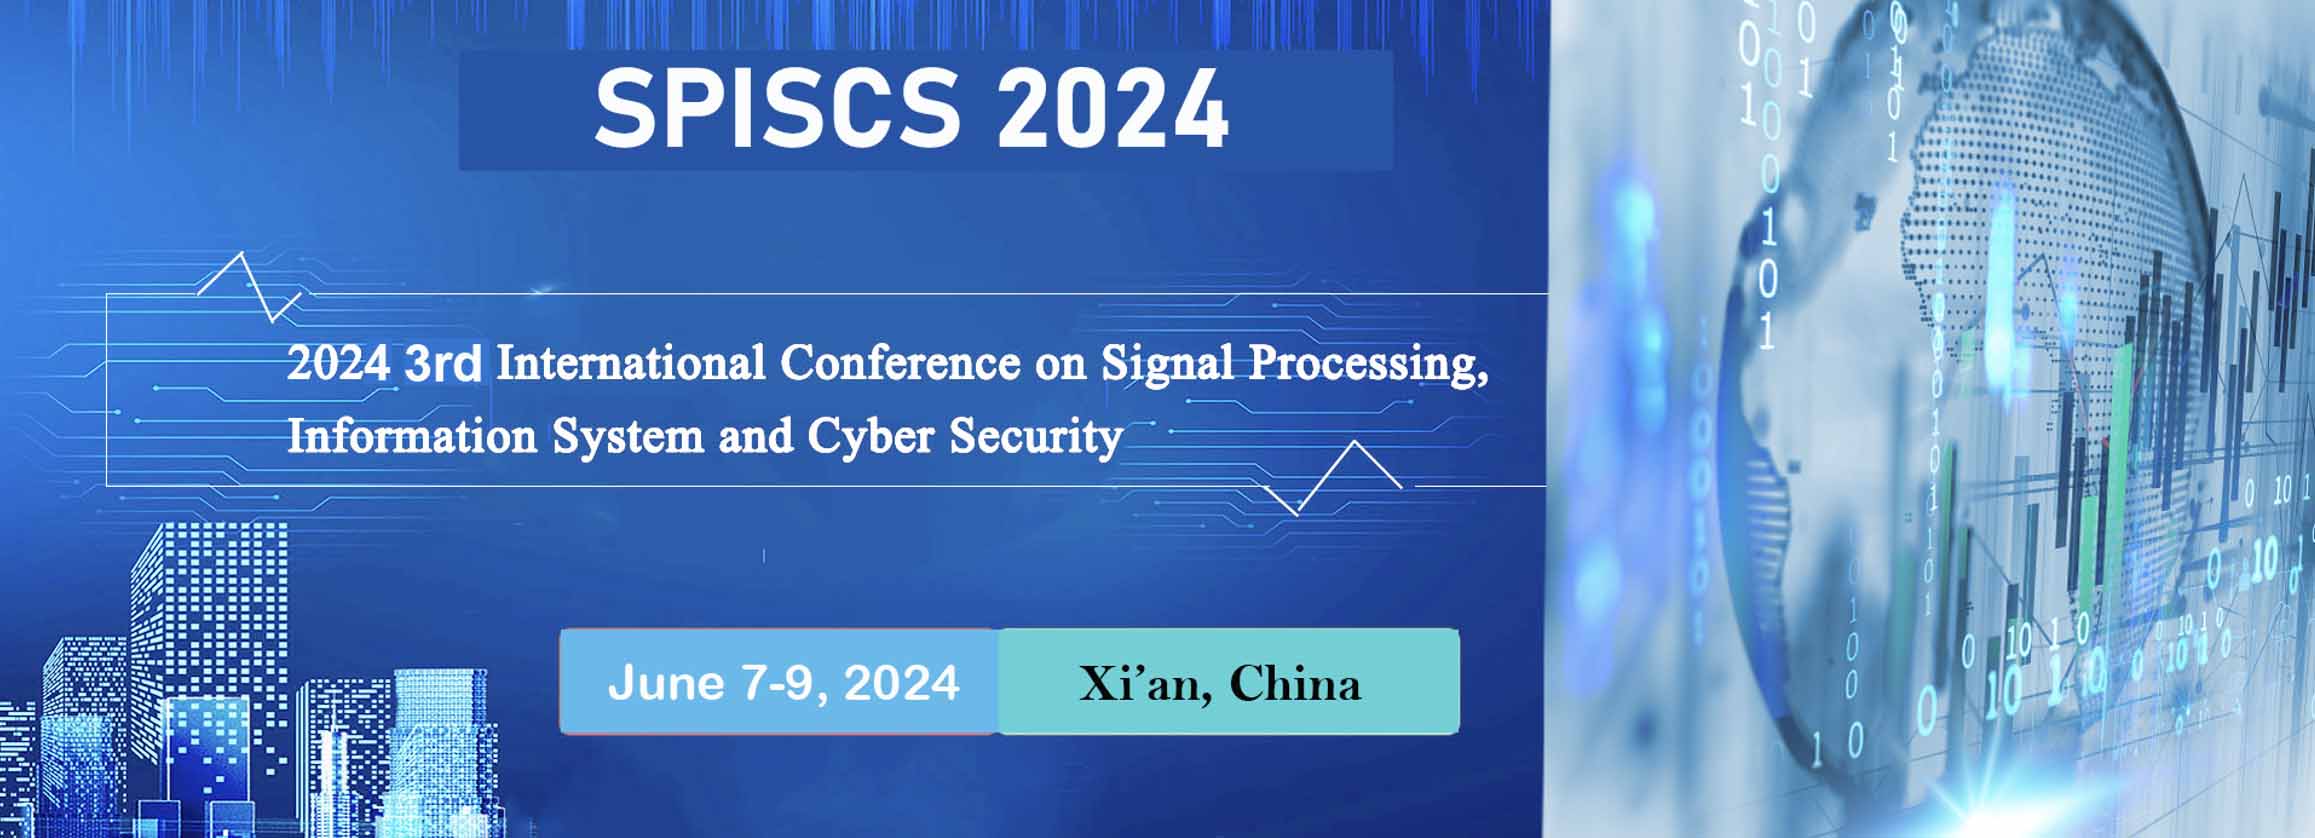 2024 3rd International Conference on Signal Processing, Information System and Cyber Security (SPISCS 2024), Xi'an, Shanxi, China